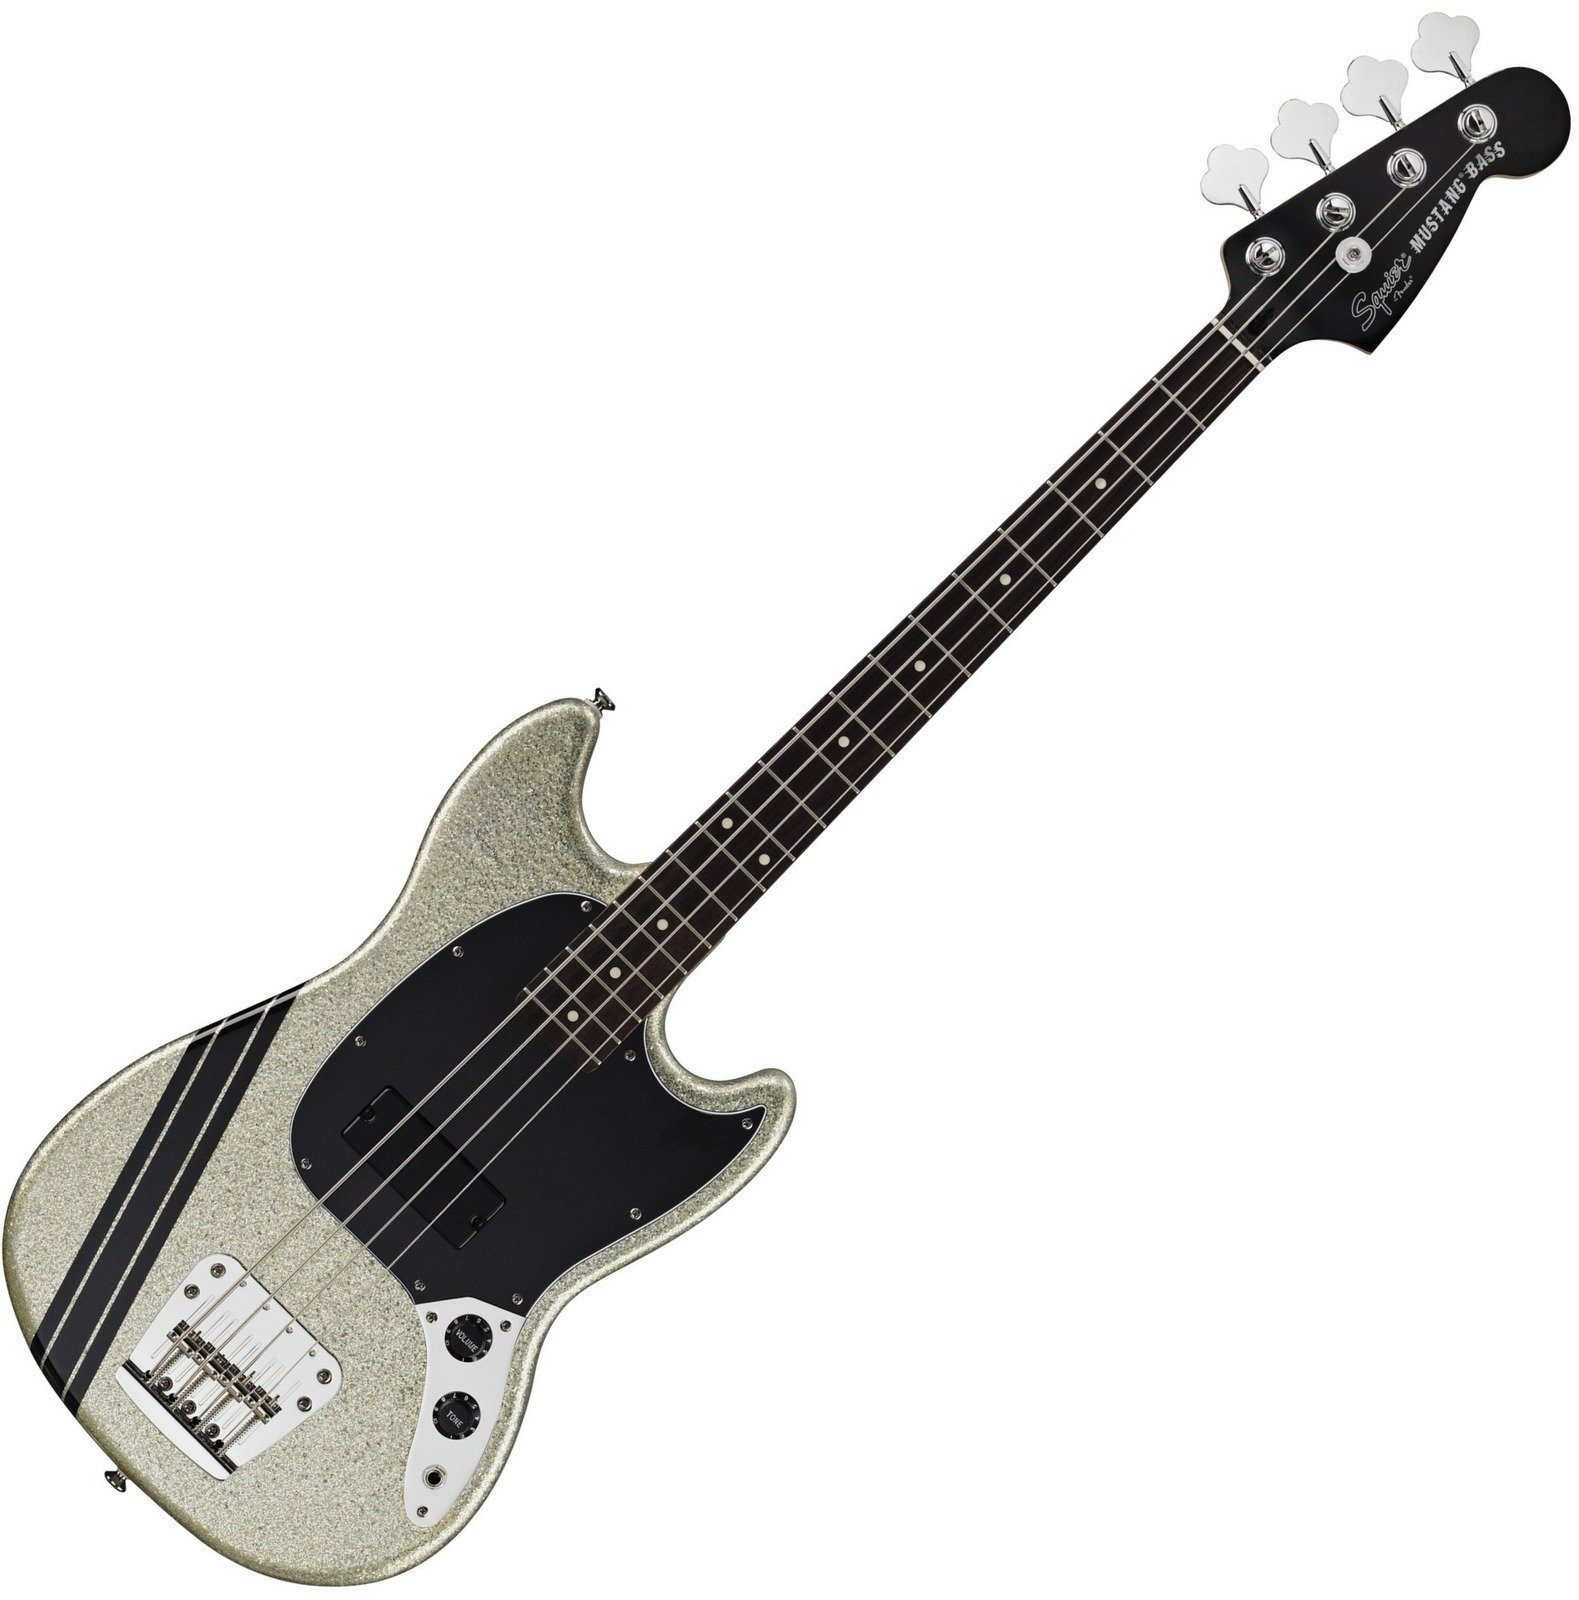 4-string Bassguitar Fender Squier Mikey Way Mustang Bass Large Flake Silver Sparkle